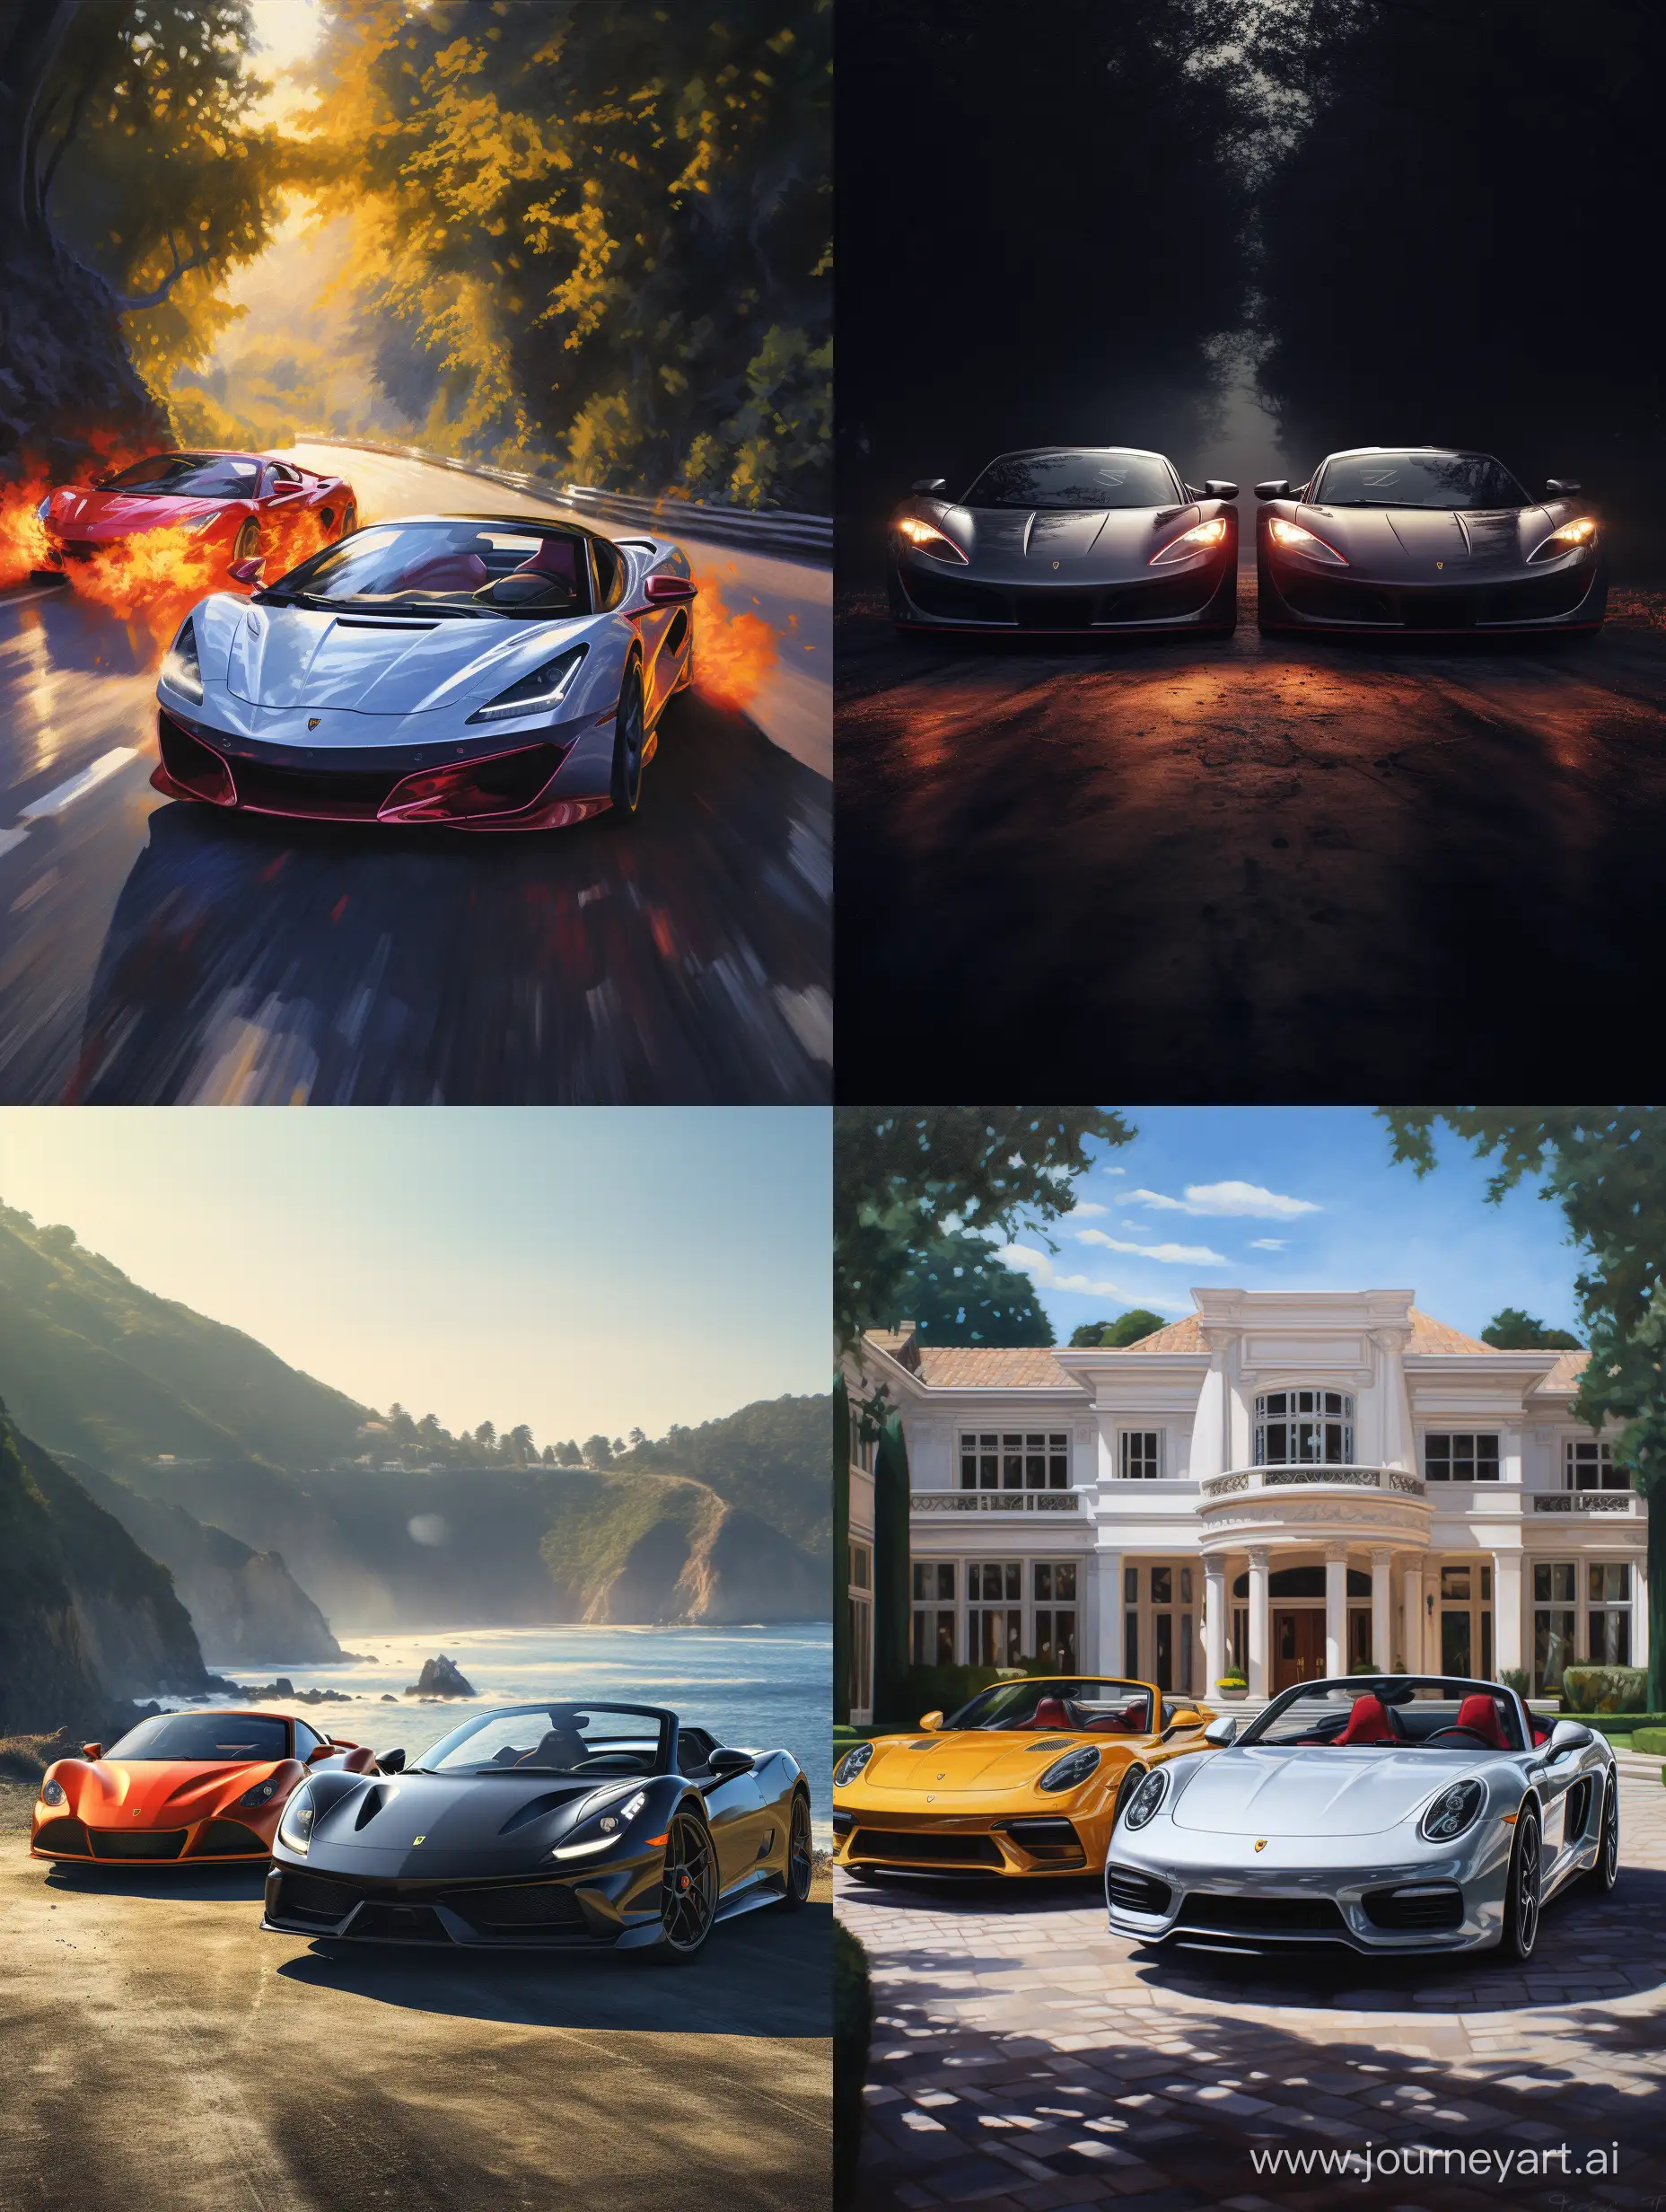 "Lamborghini and Ferrari: A Dynamic Duo of Supercar Legends, Capturing the Essence of Speed, Precision, and Unparalleled Automotive Artistry. Explore the Roaring Beauty and Exquisite Craftsmanship in Every Curve and Contour."